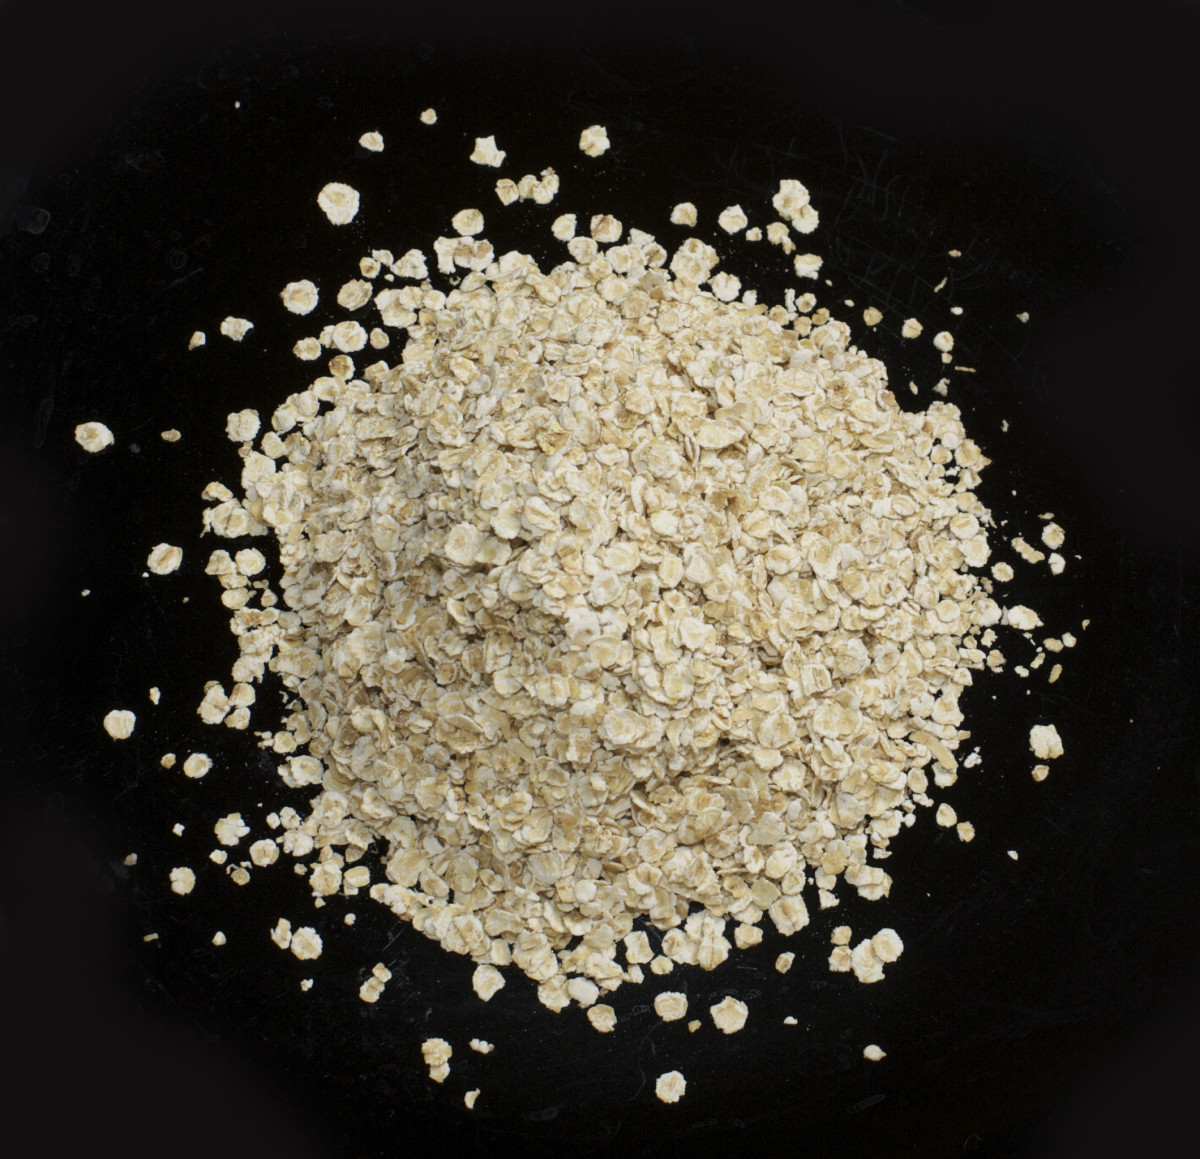 Oatmeal is also known as porridge or white oats.